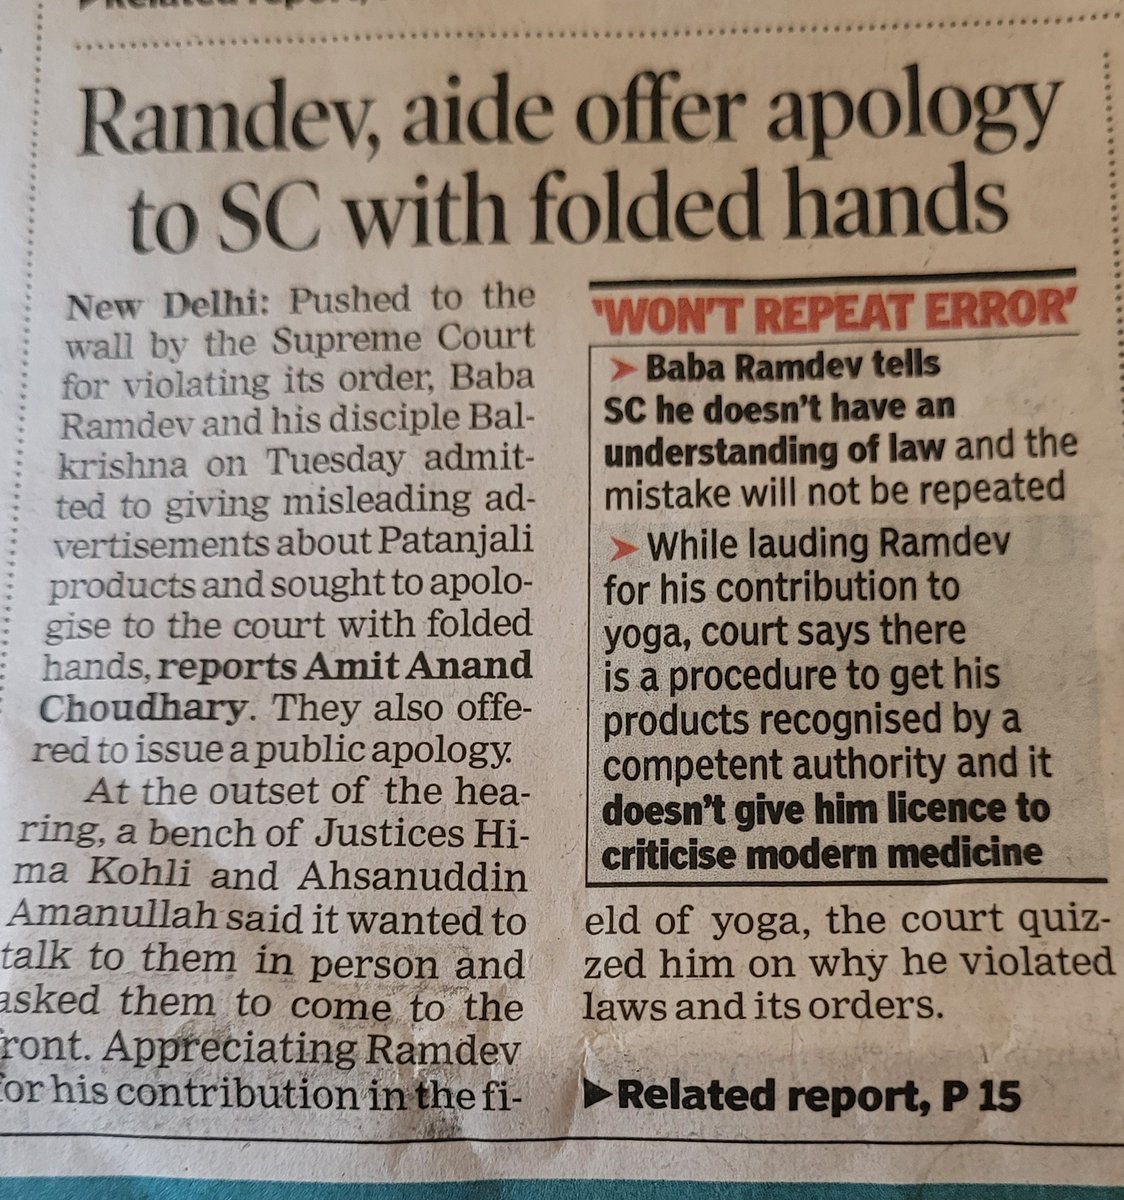 #SanatanDharma being insulted by once again by a judge of faith that has religious hatred . Is this judge of @SCofIndia BLIND to the cancerous PanMasala promoter #ShahRukhKhan & #SalmanKhan of same faith as his?? Why no action against them?? Gross abuse of power of law 😠 😡 👿